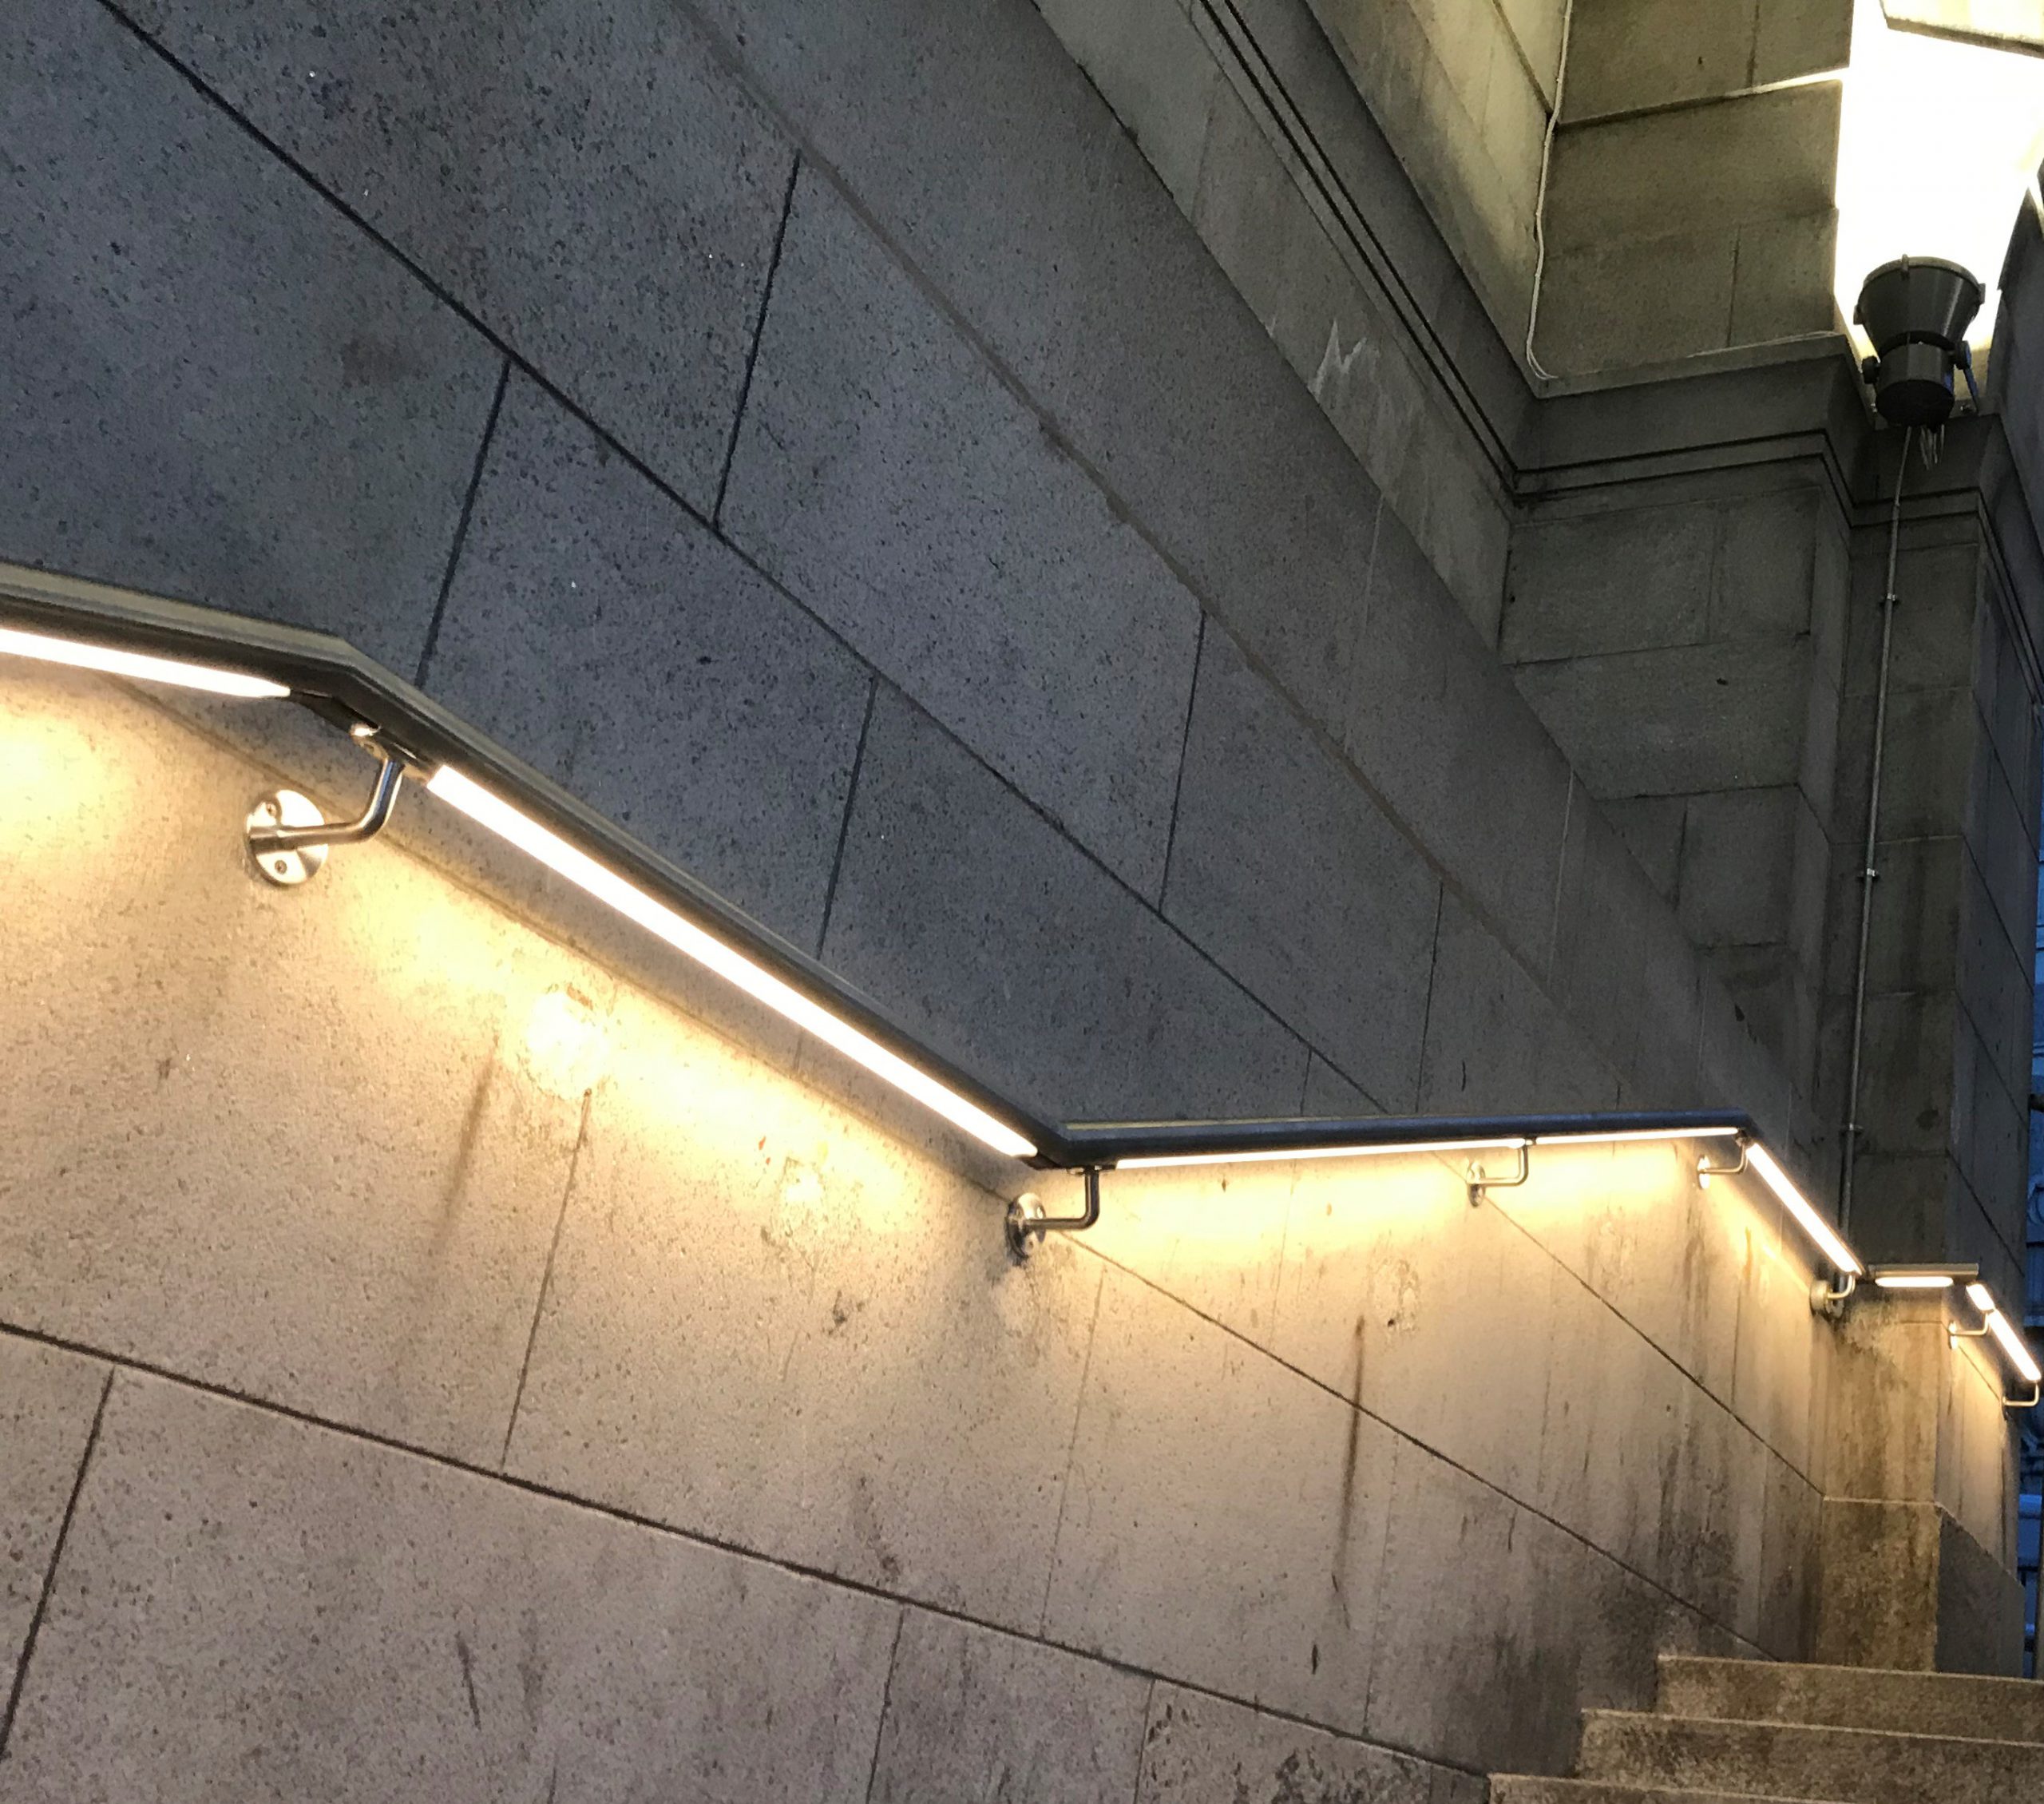 Aberdeen Station handrail lighting is right on track